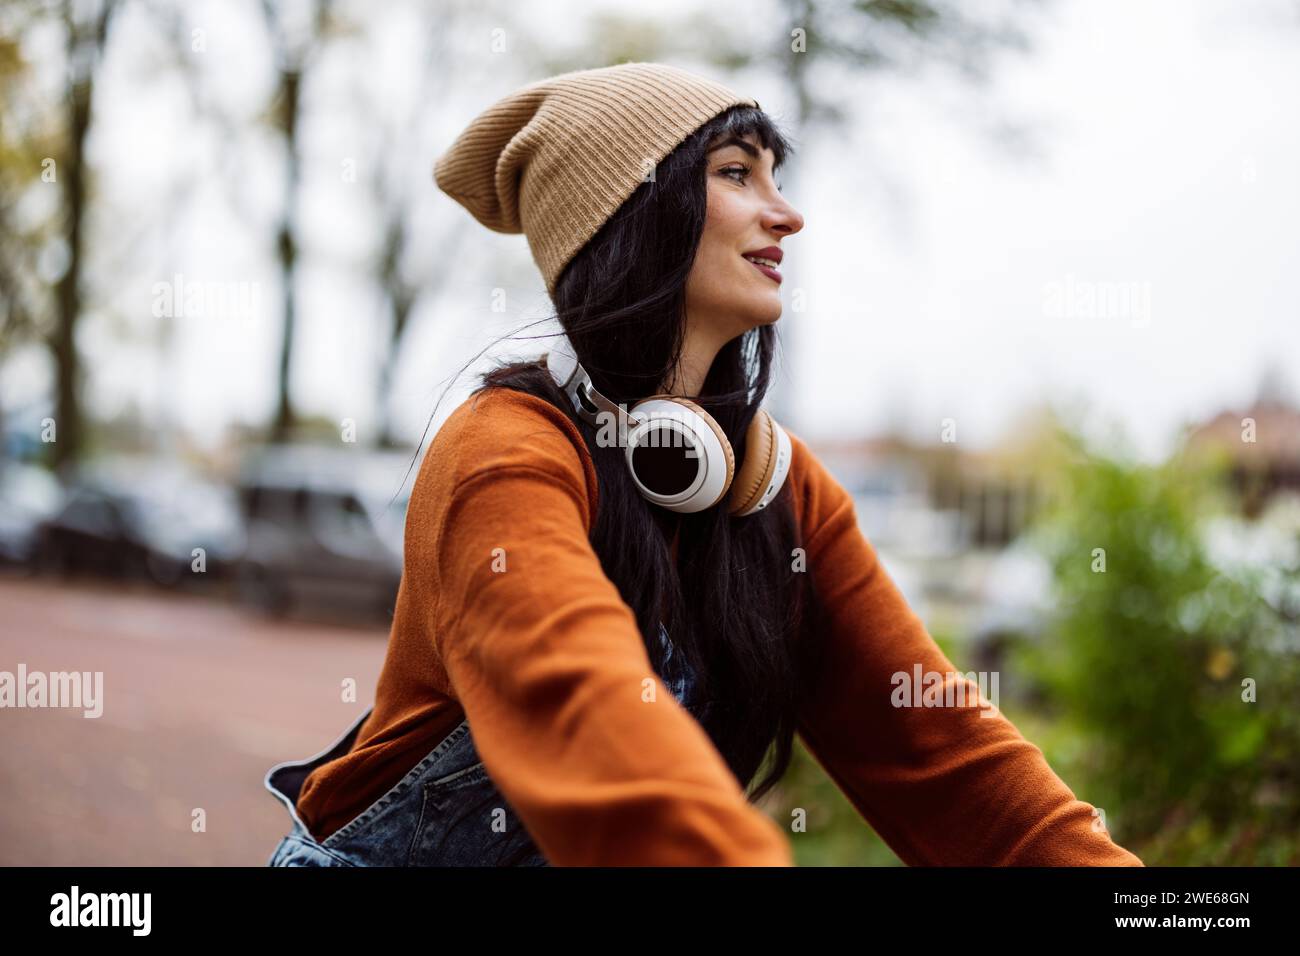 Happy woman with wireless headphones and knit hat Stock Photo